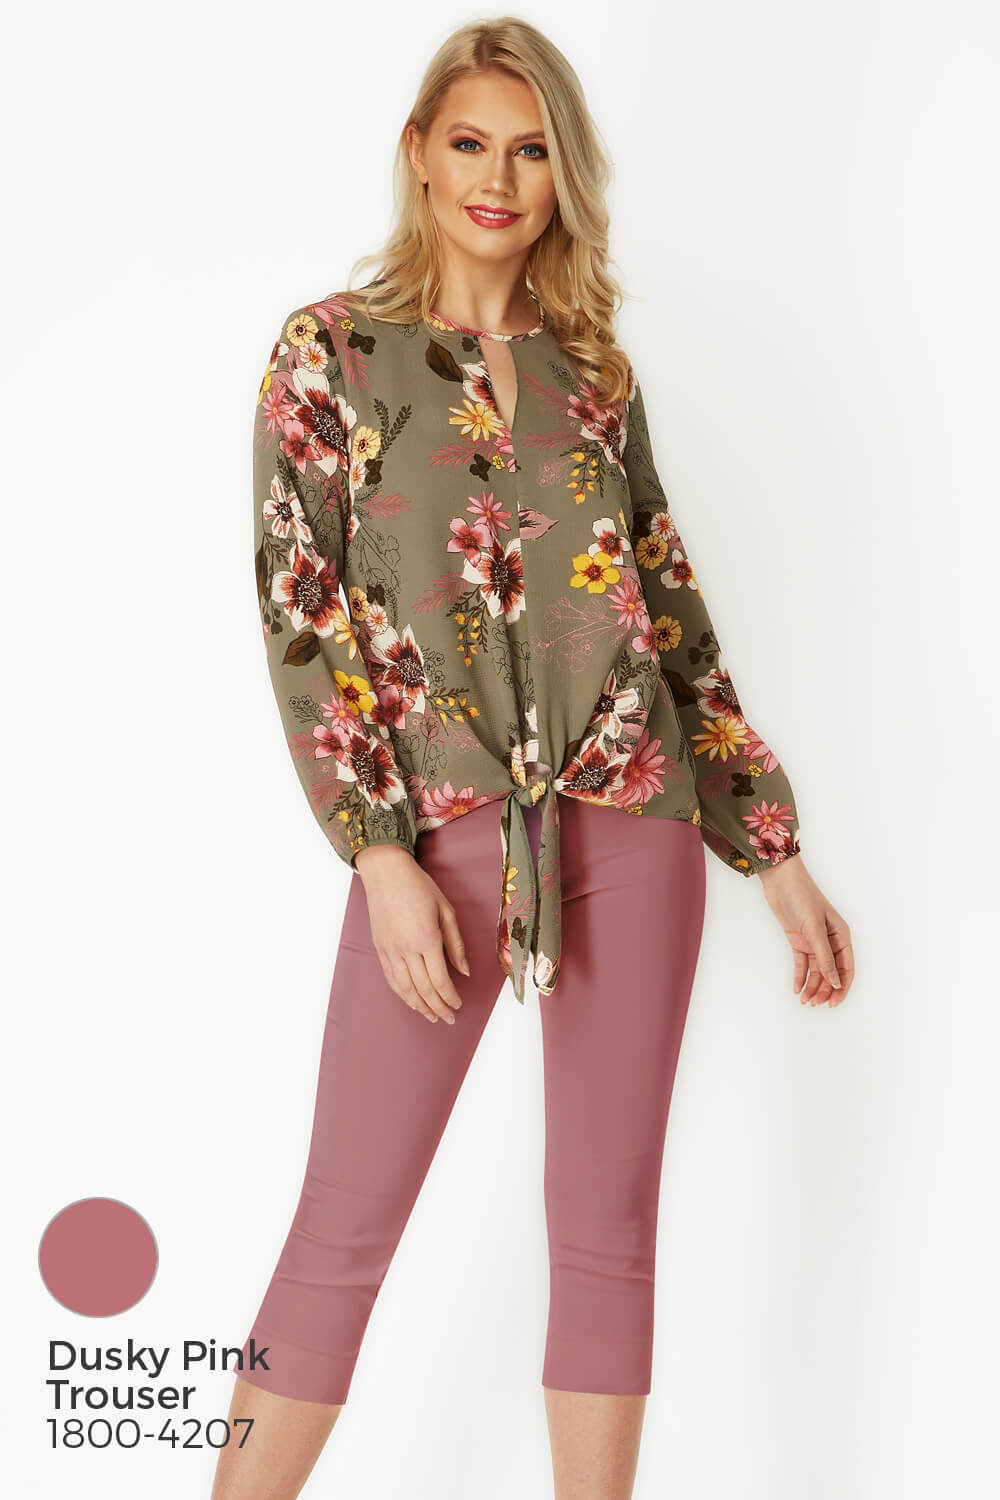 KHAKI Floral Tie Front Top, Image 8 of 8